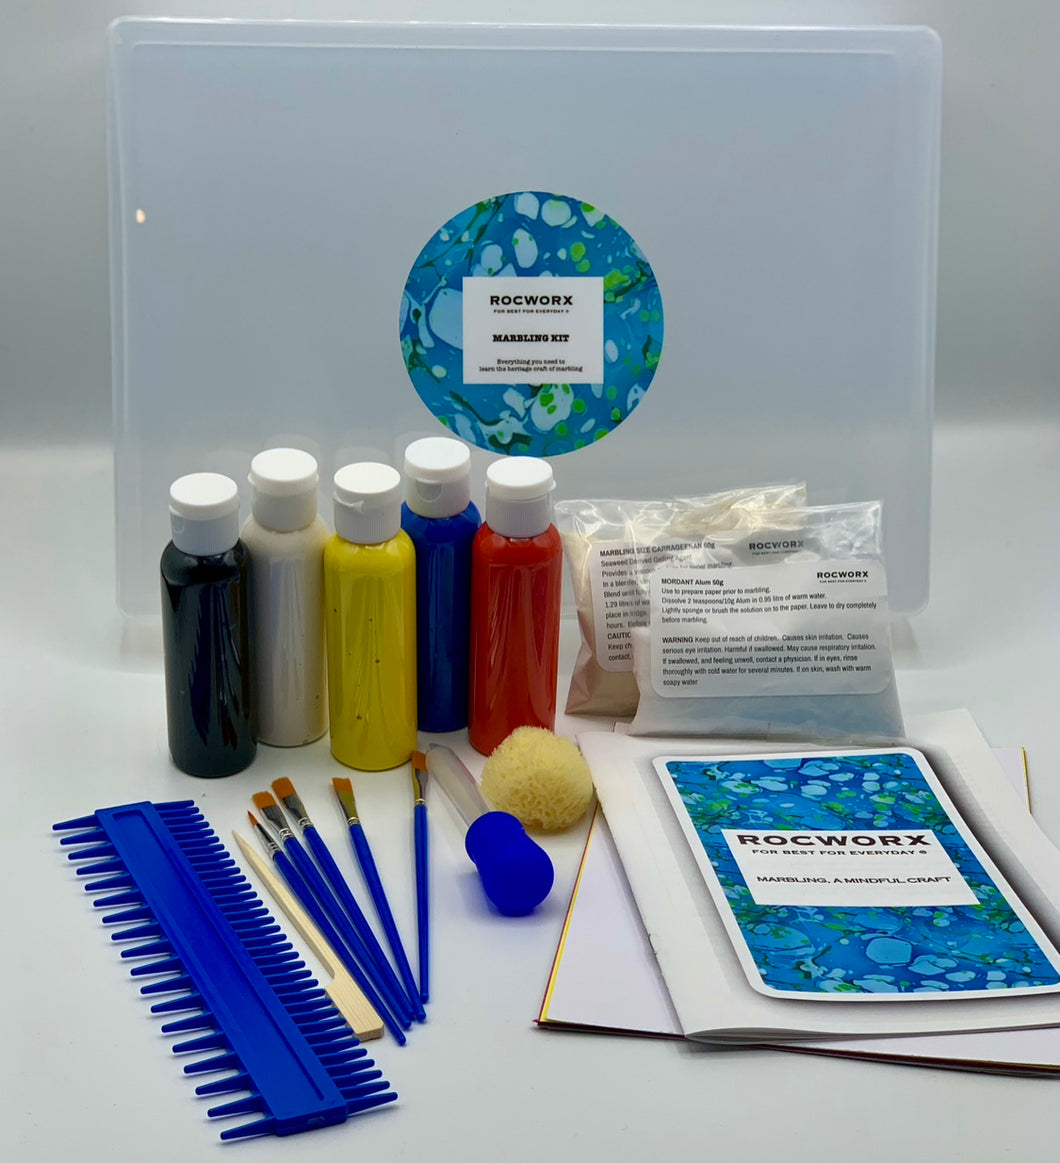 Marbling Kit containing everything you need to marble successfully at home. Comes in an A4 plastic lidded bath tray, acrylic paints, brushes, stylus, Combe, pipette, pipette brush cleaner, marbling mix, mordant mix, natural sponge, papers, card, and guide.